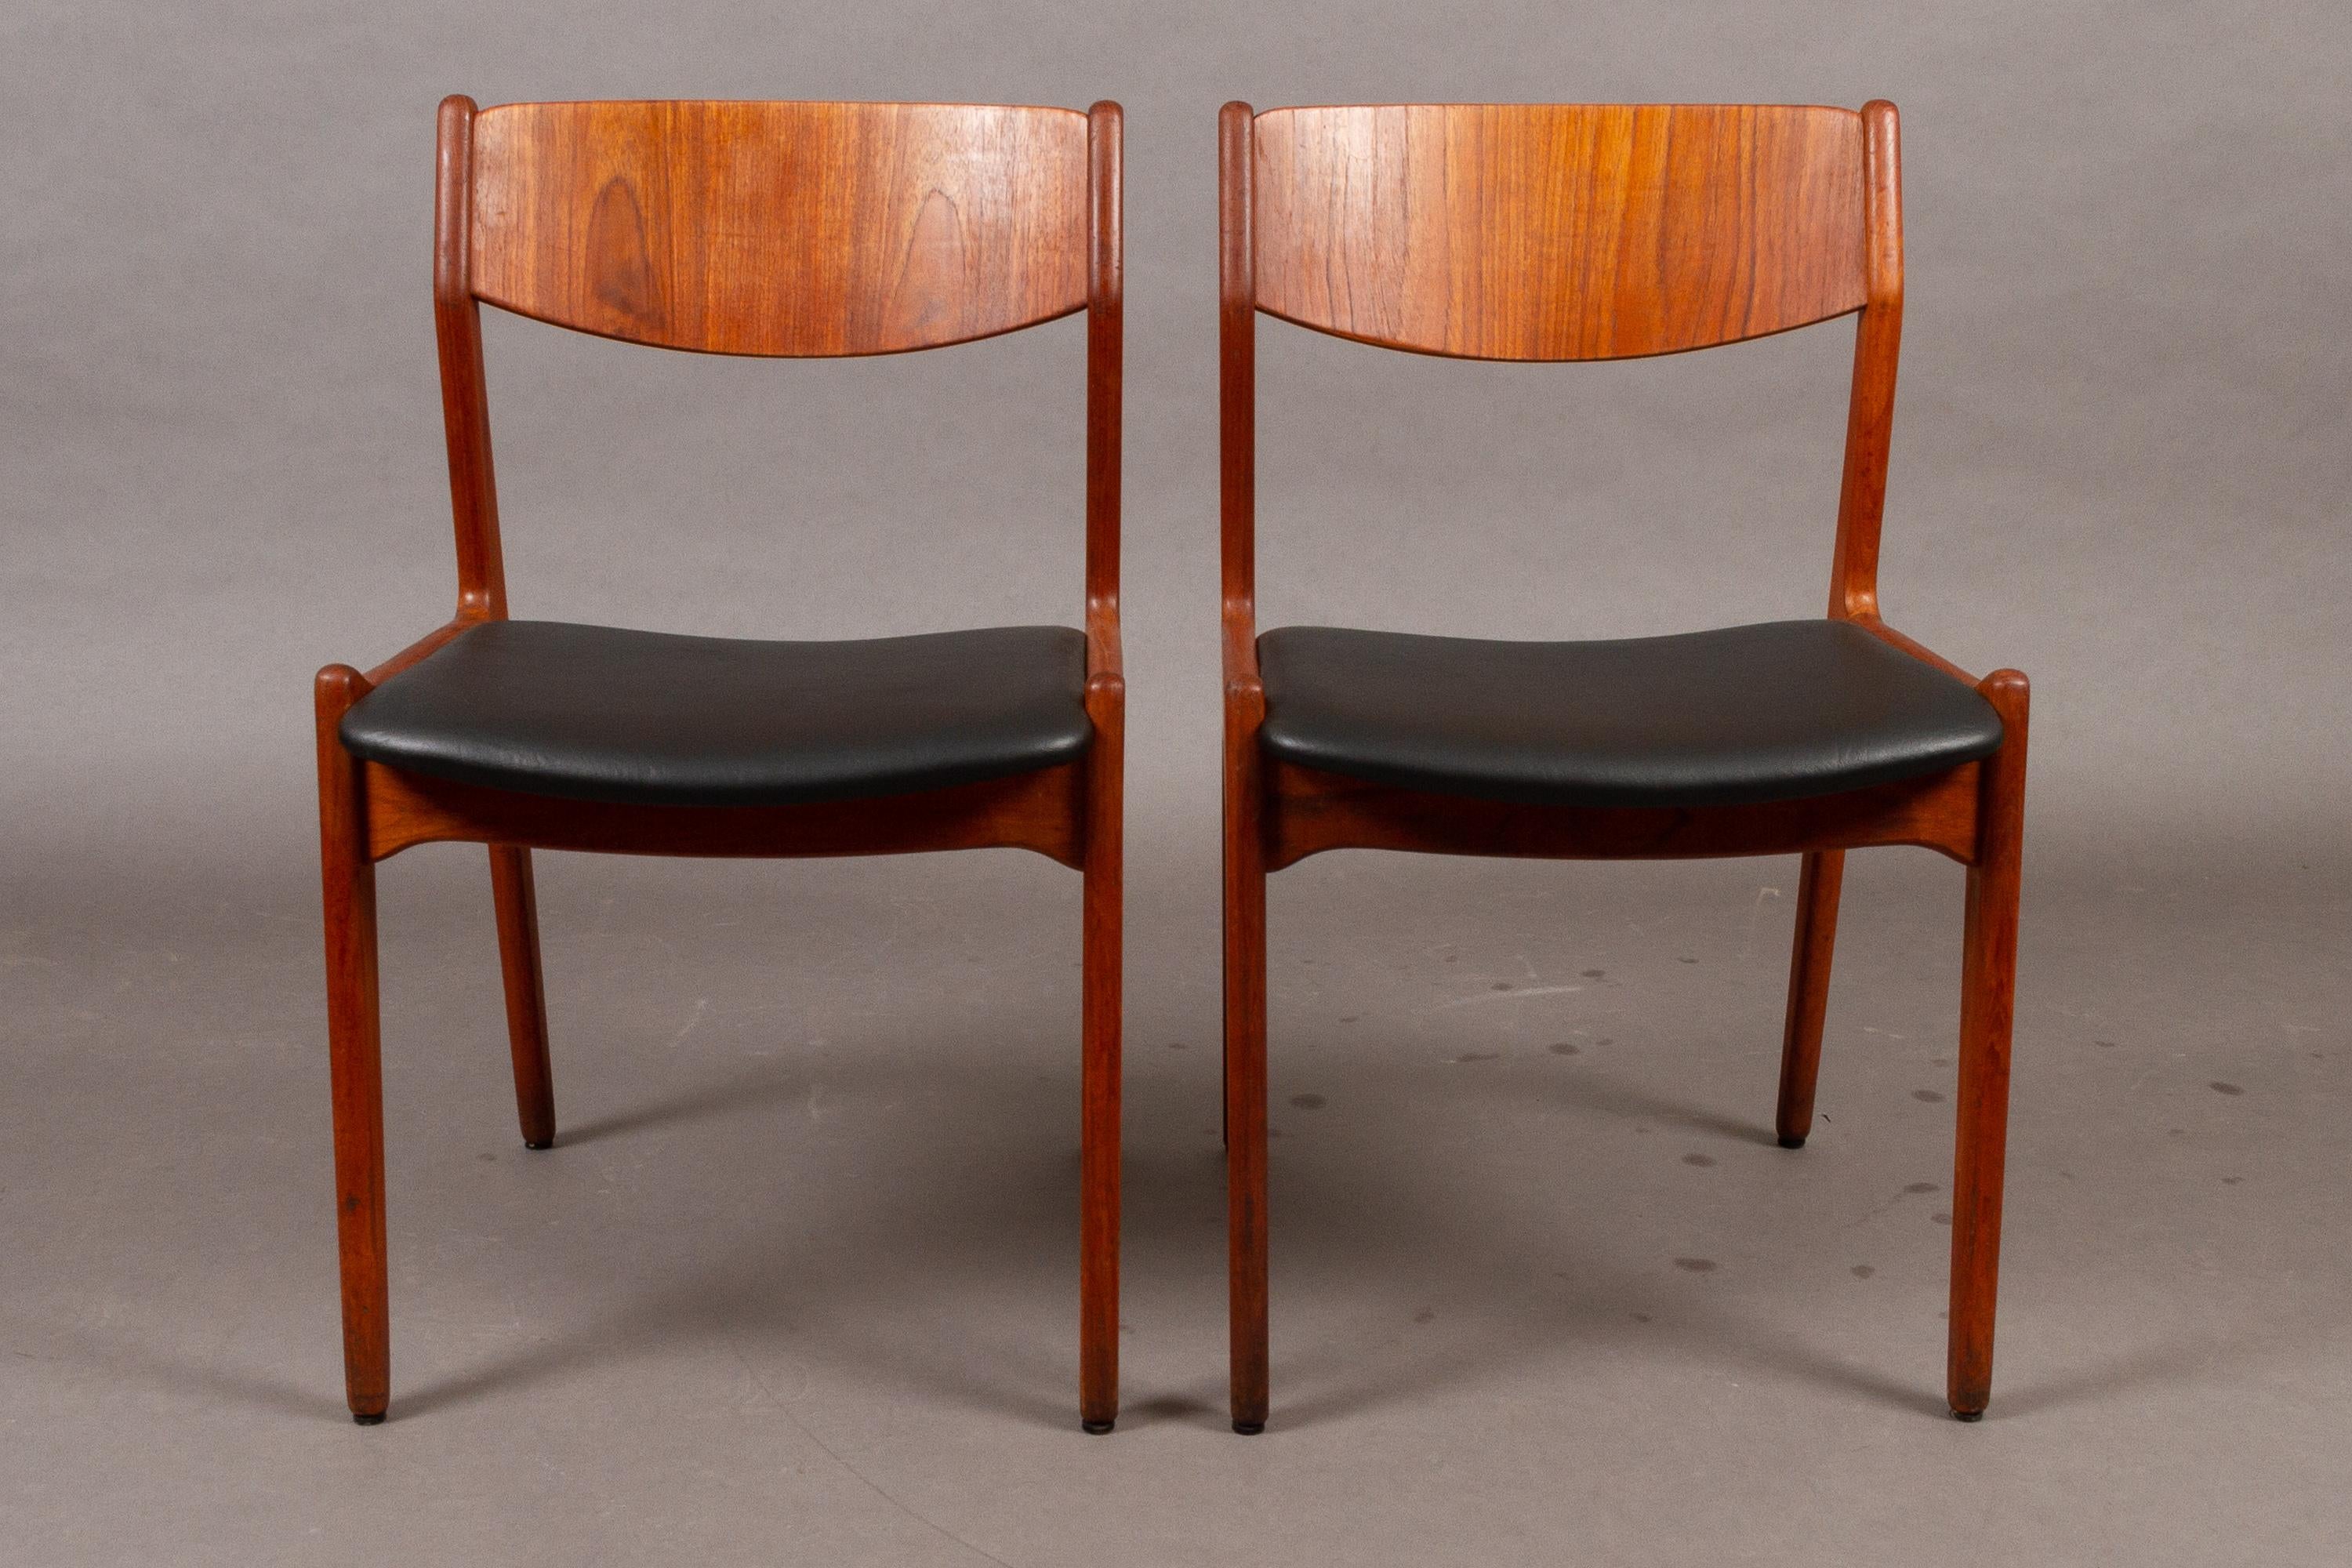 Danish vintage teak dining chairs, 1960s, set of 2.
Pair of Danish dining chairs in solid teak with curved backrests.
Classic Mid-Century Modern design from Danish manufacturer Sorø Møbelfabrik.
Seats have been reupholstered with quality